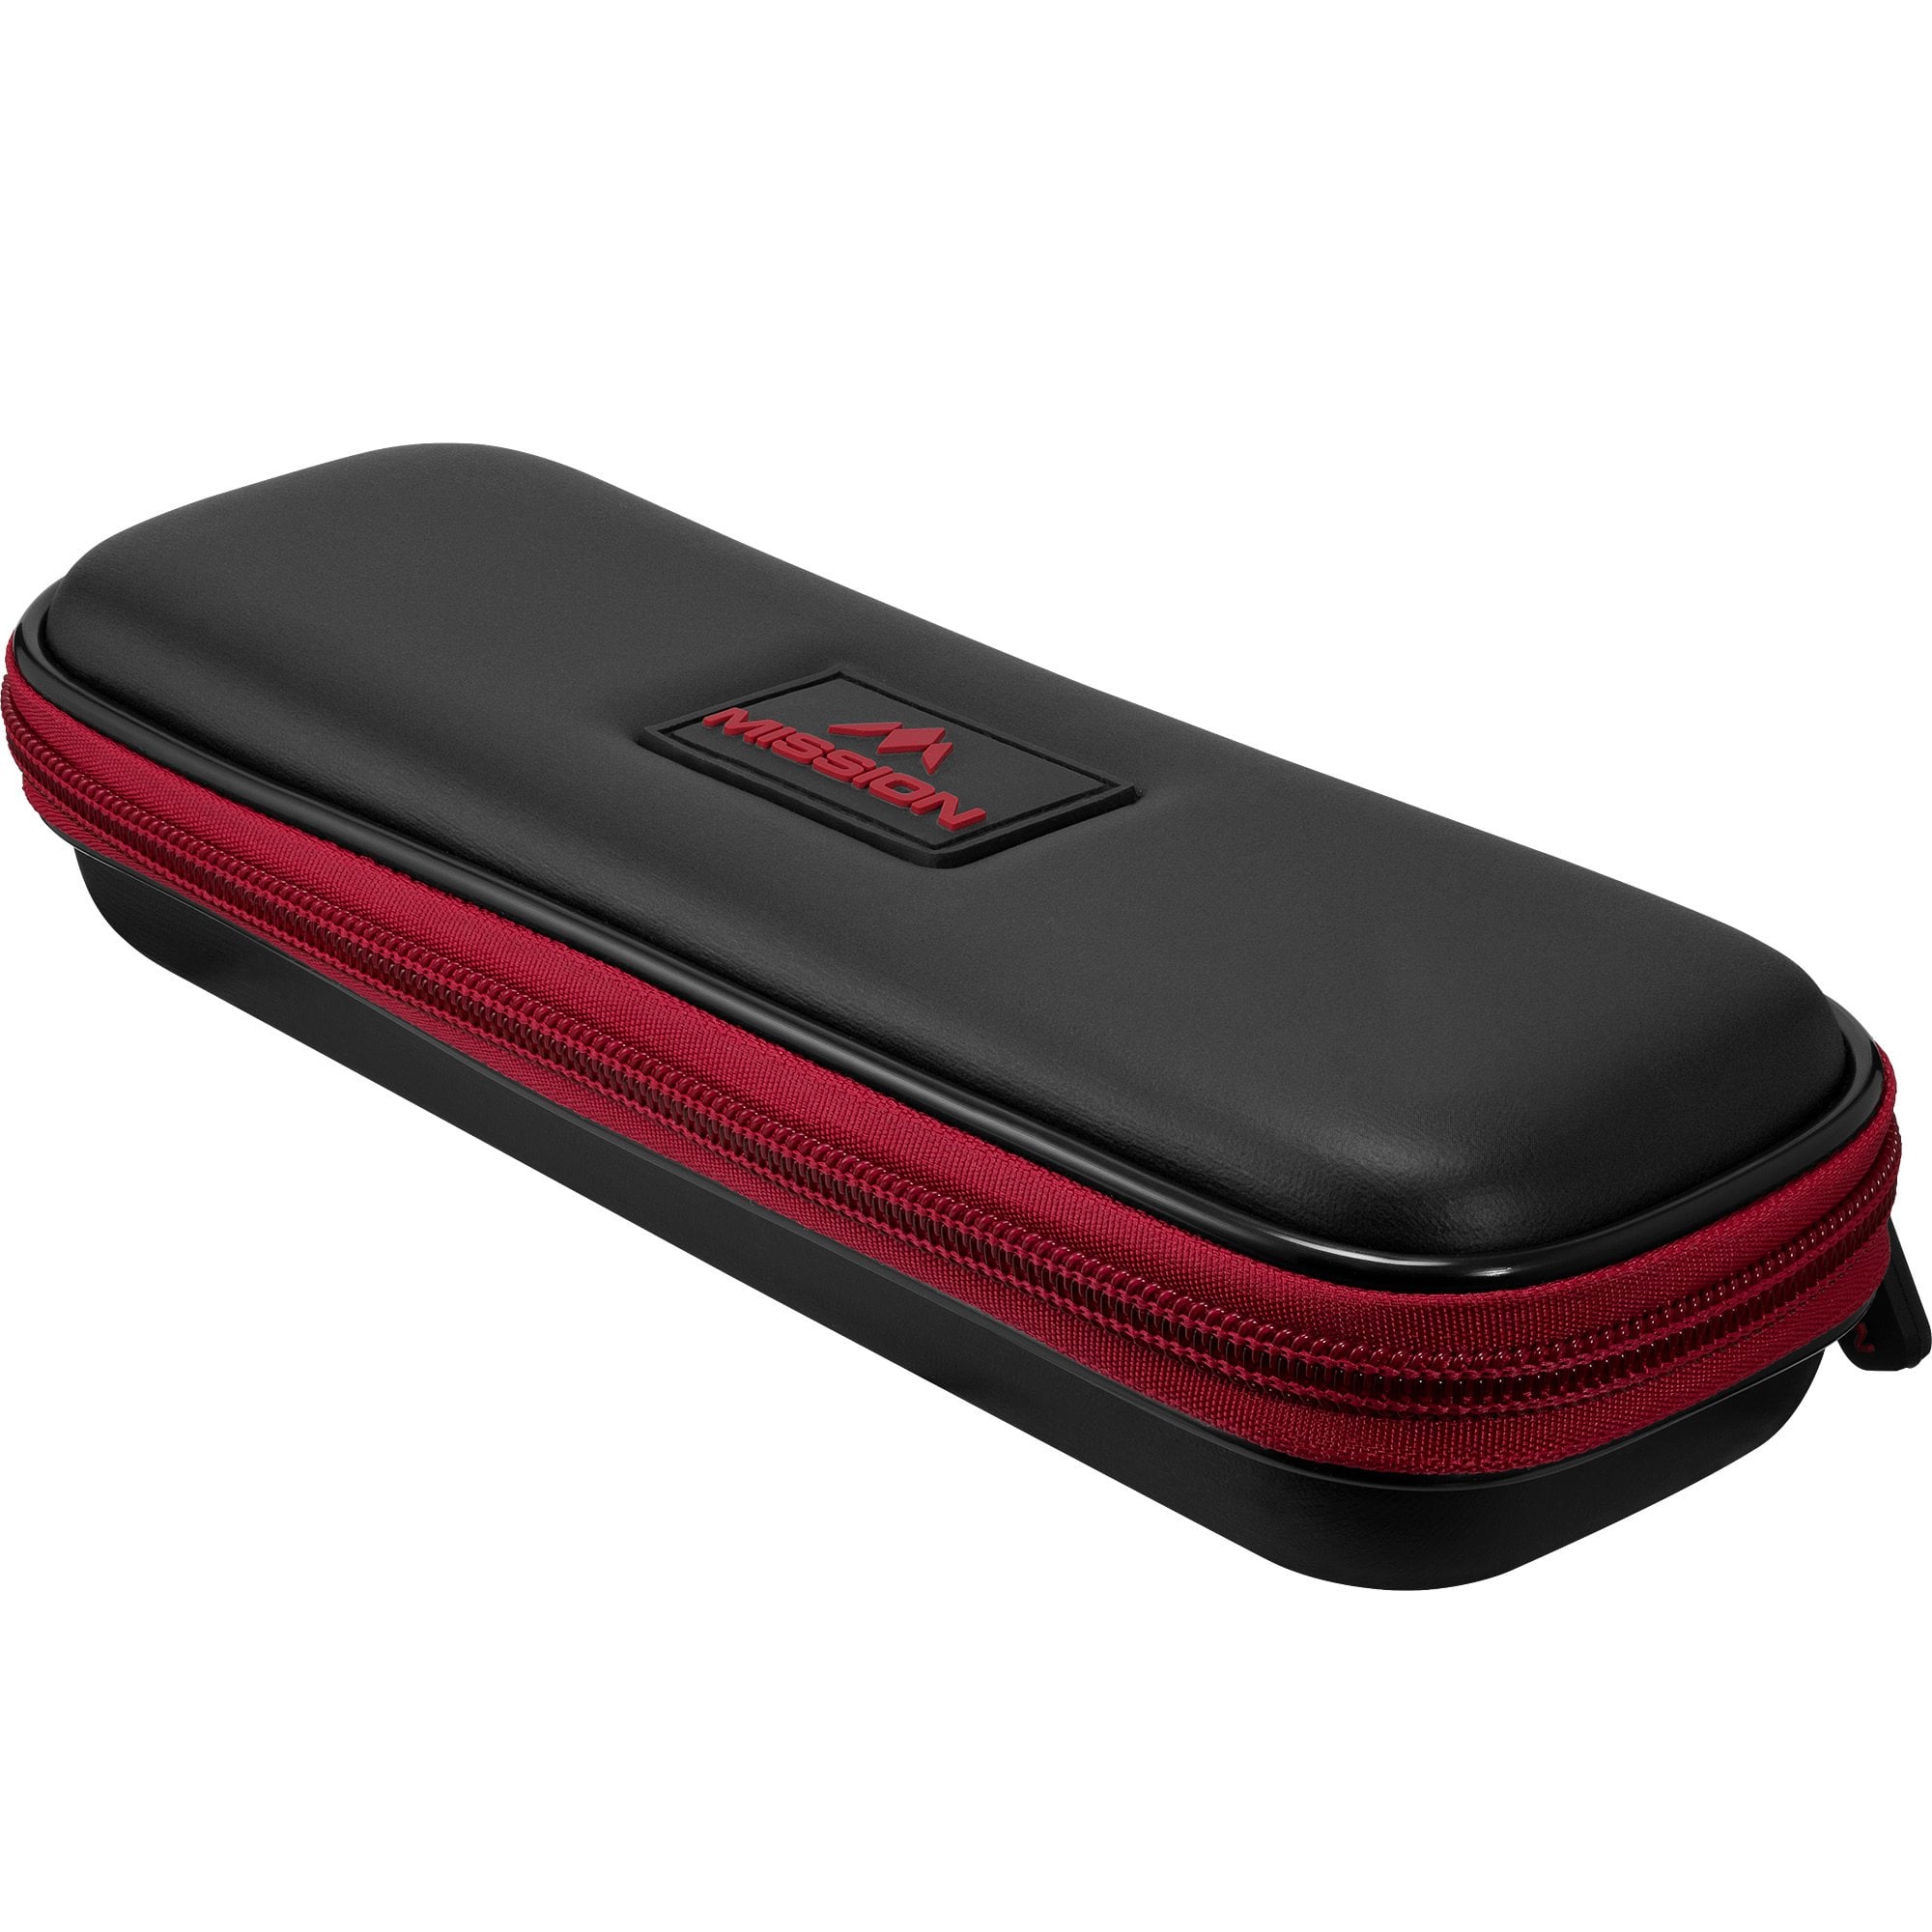 Mission Freedom Slim Darts Case - Strong Protection